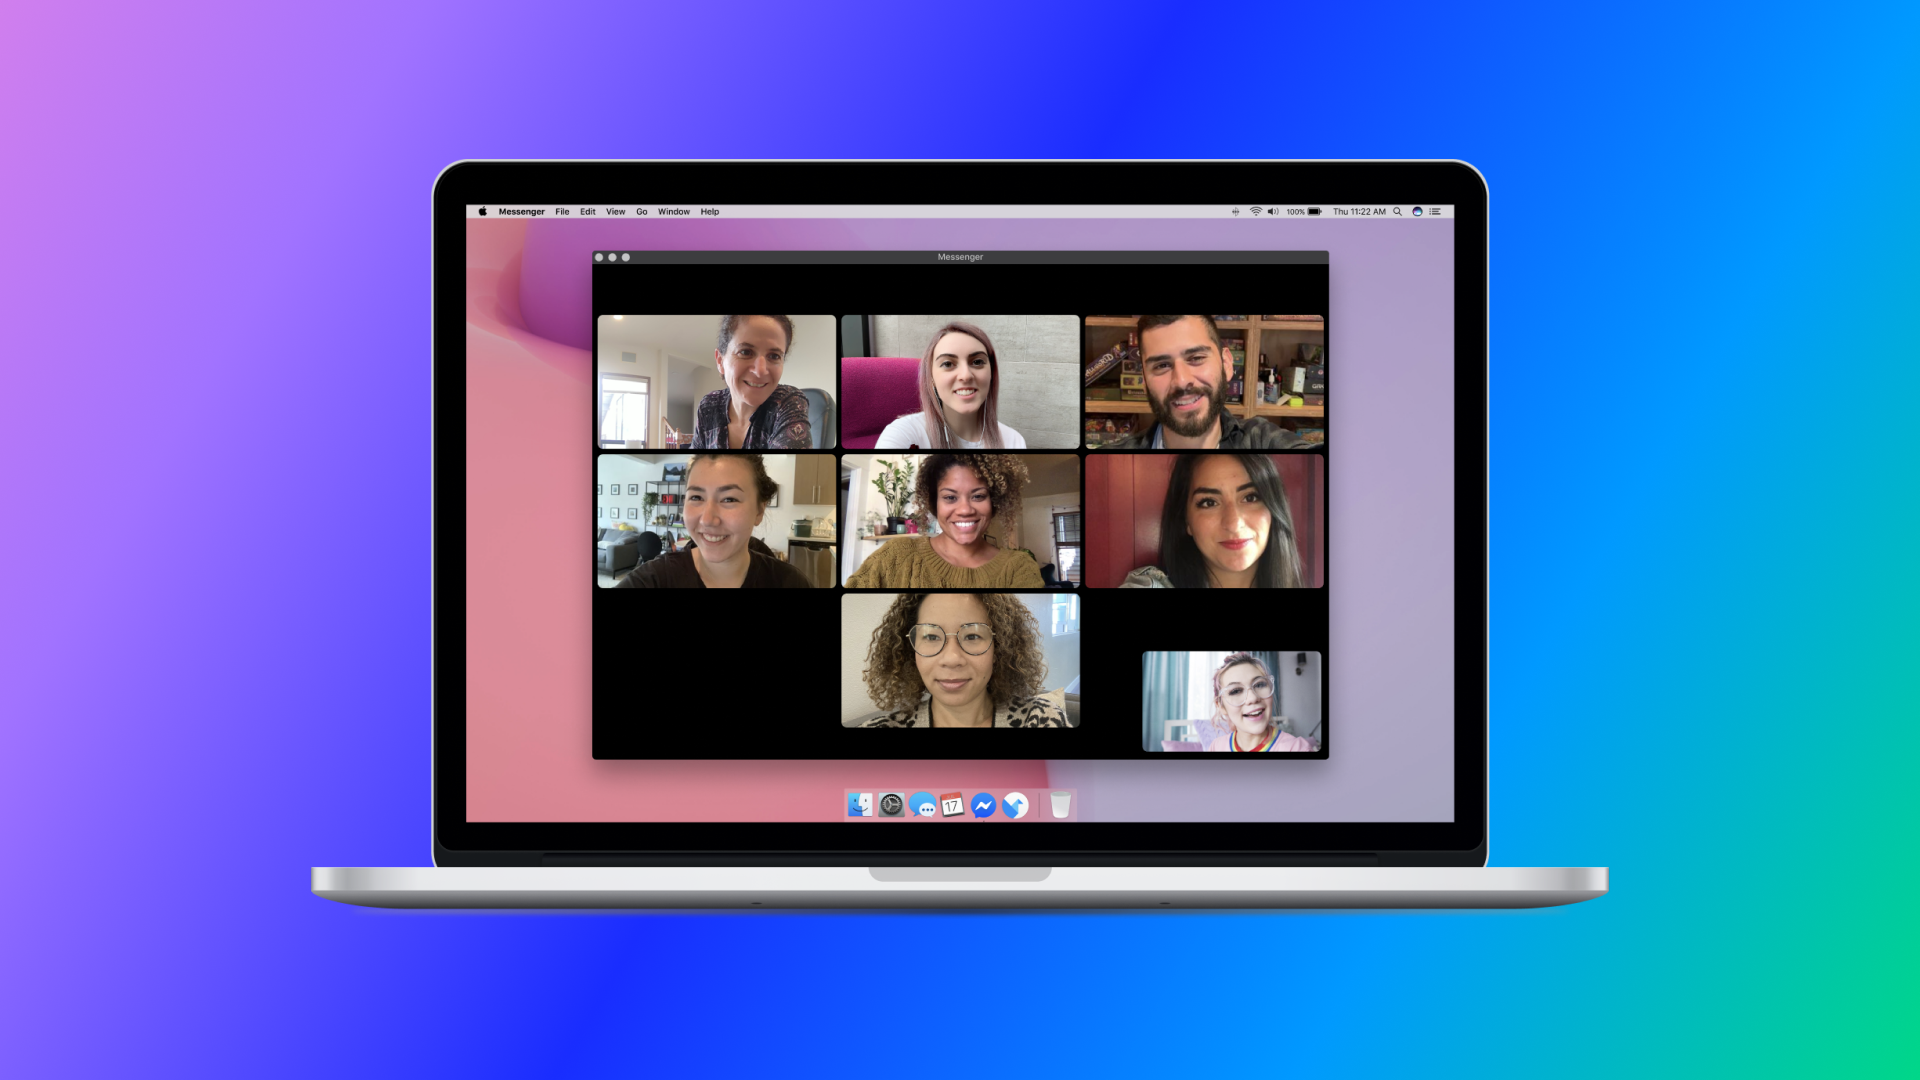 New Messenger Desktop App for Group Video Calls and Chats - About Facebook